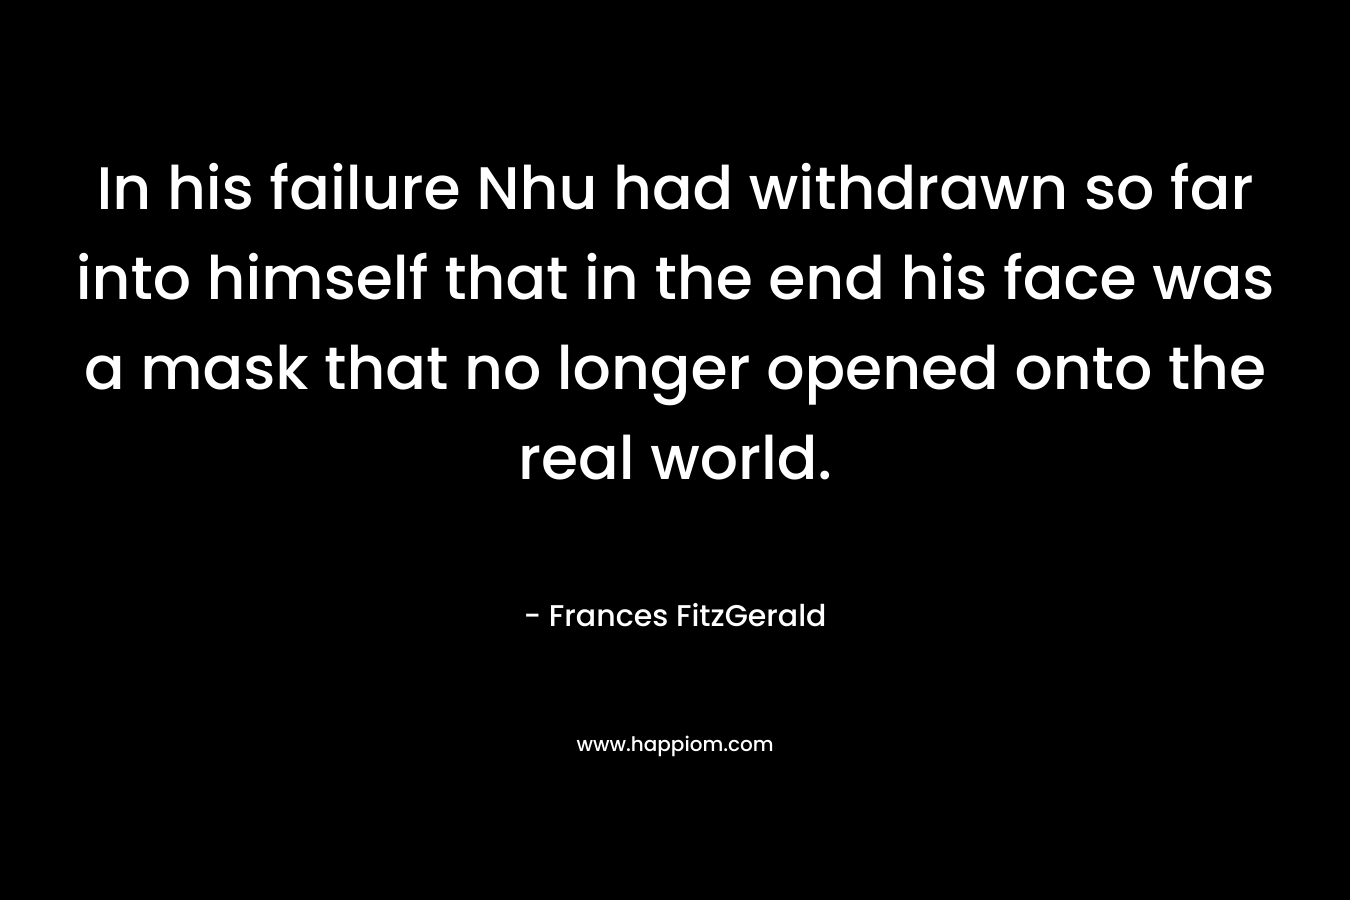 In his failure Nhu had withdrawn so far into himself that in the end his face was a mask that no longer opened onto the real world.